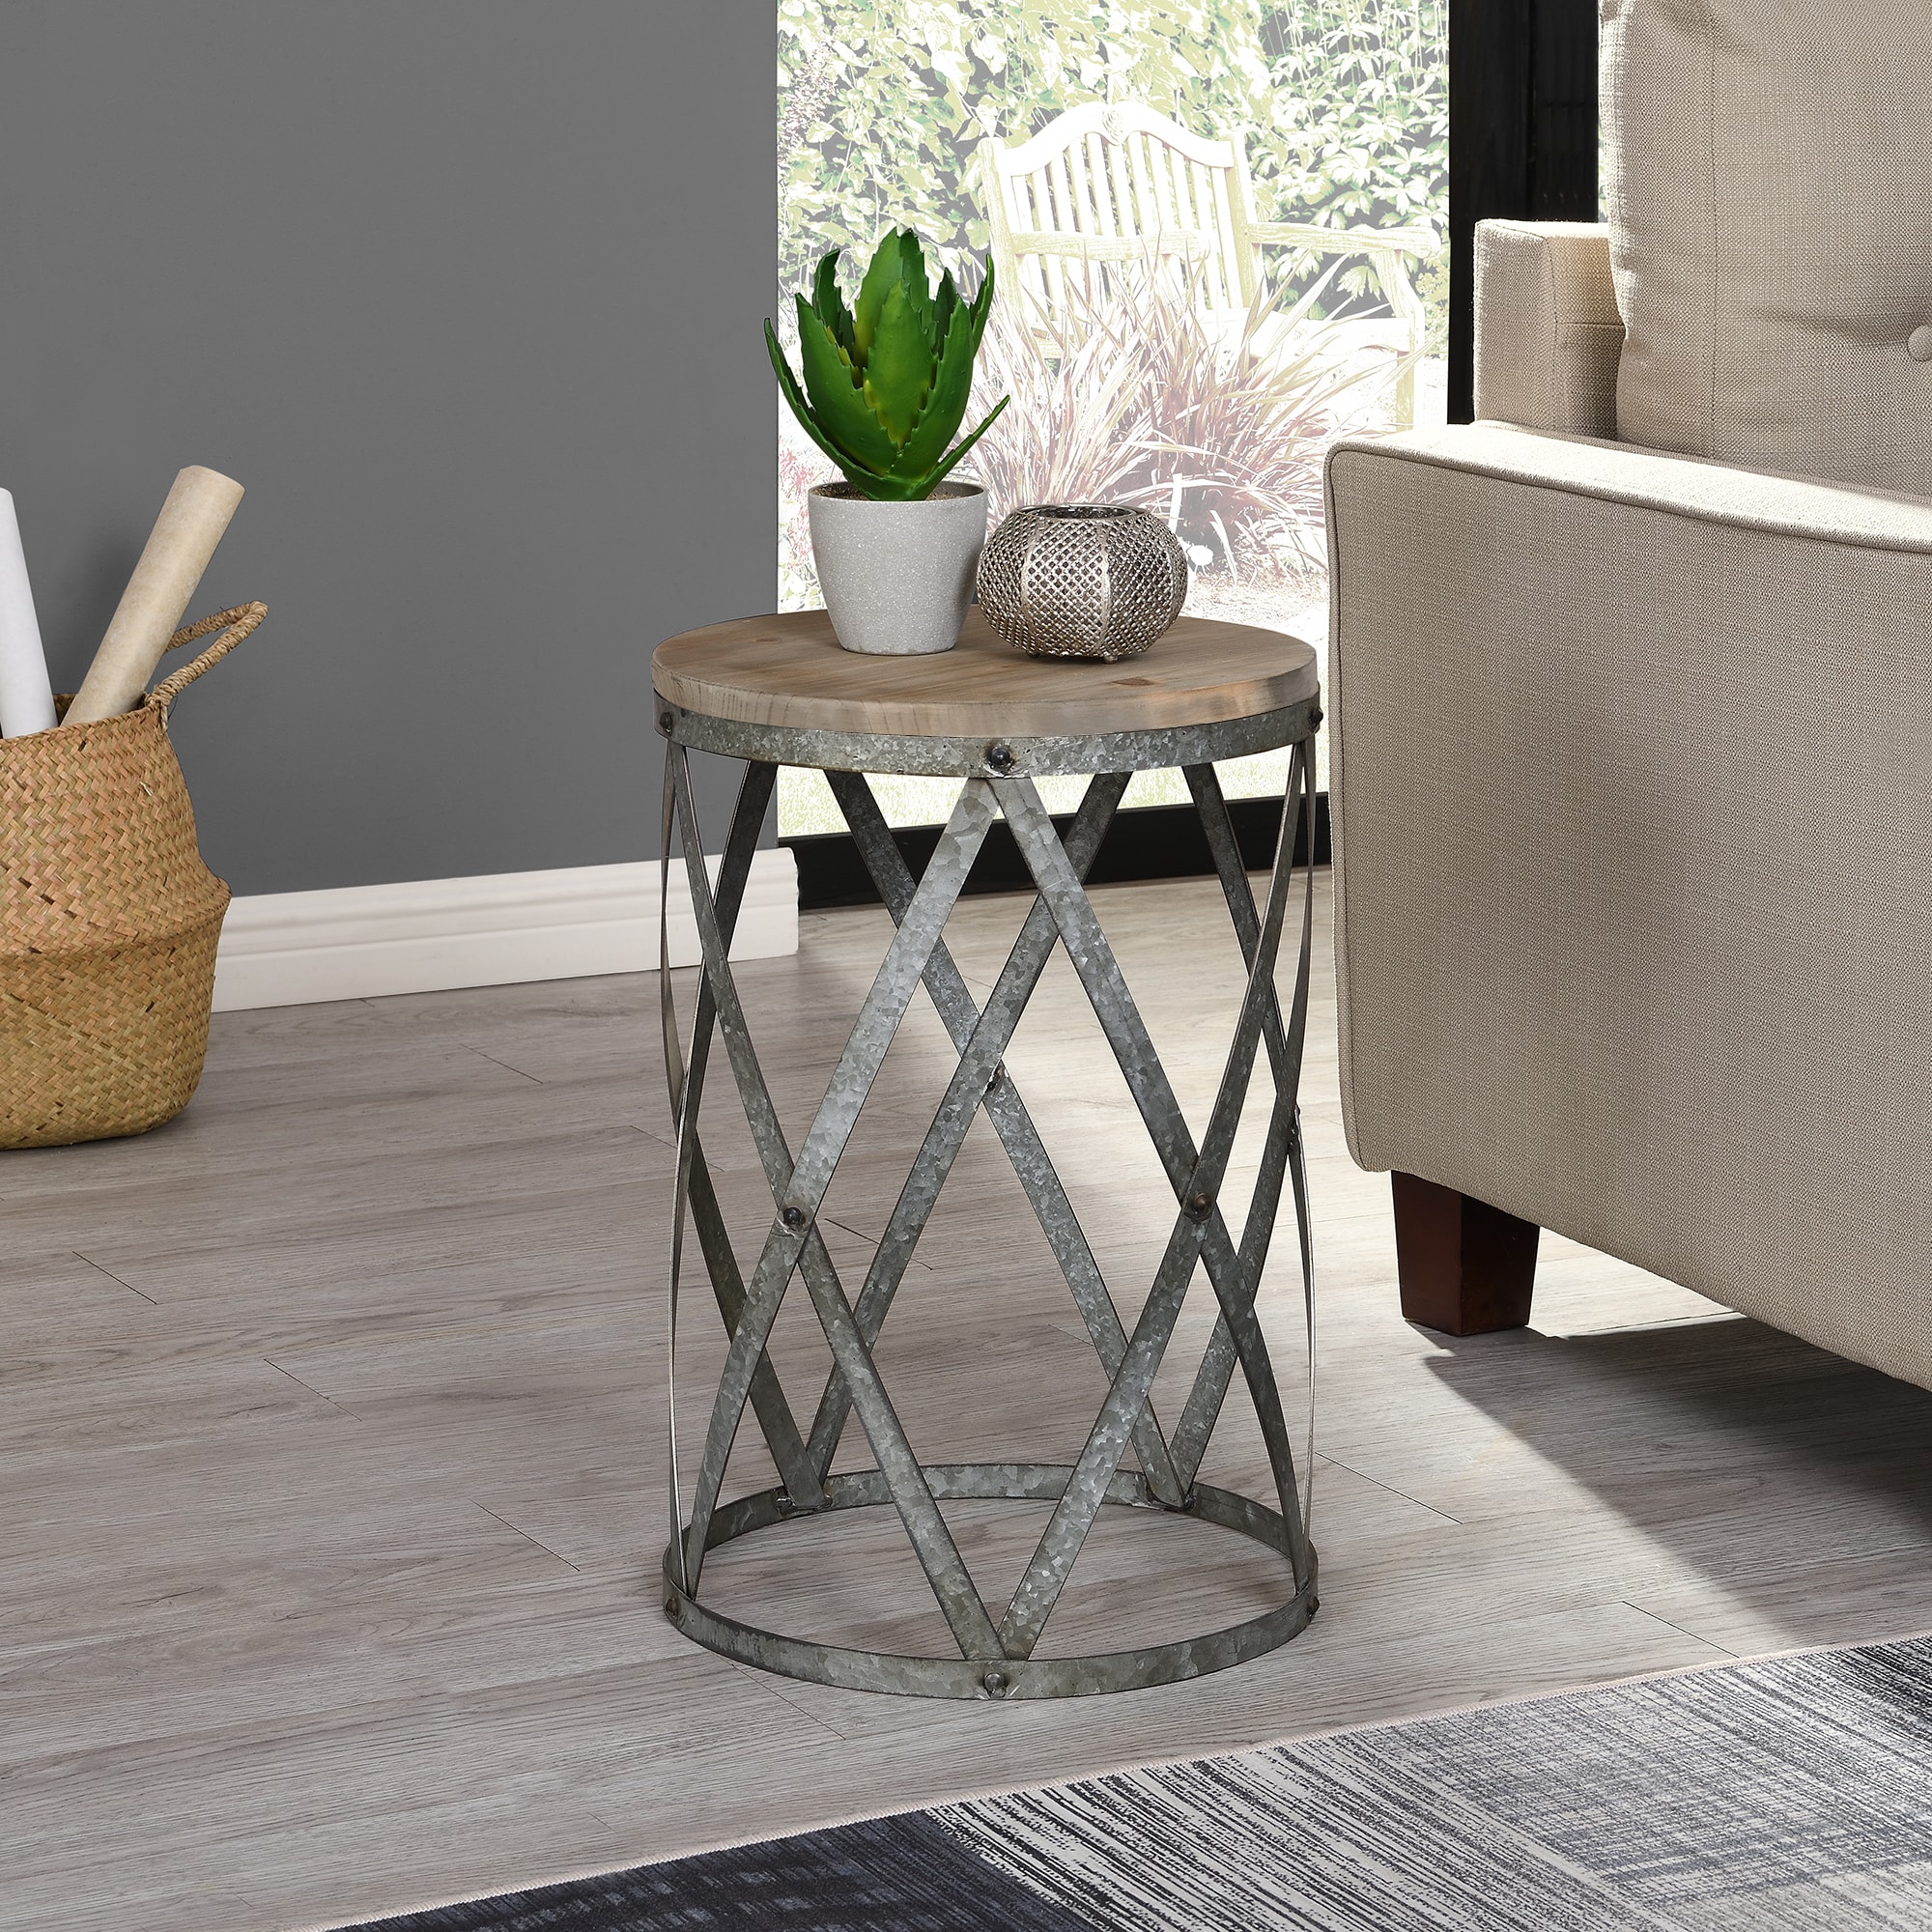 Natural Eli C Side Table FirsTime & Co Modern Style 18 x 14 x 26.25 inches Natural Wood 